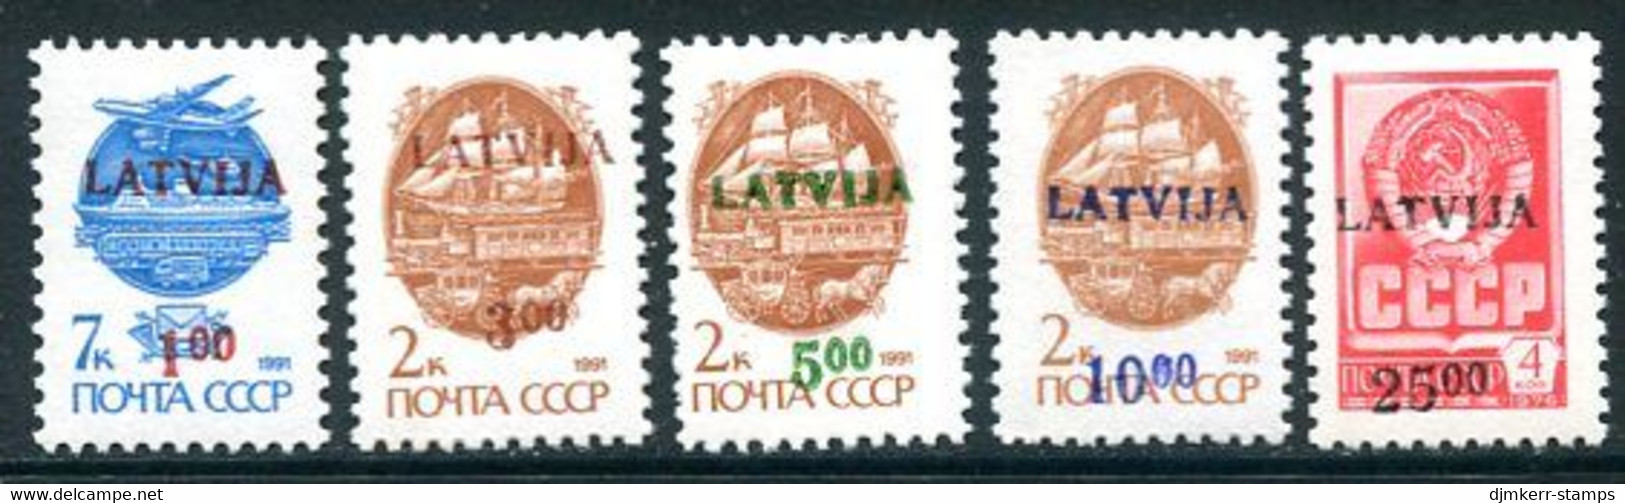 LATVIA 1992 Provisional Surcharges II MNH / **.  Michel 335-39 - Letonia